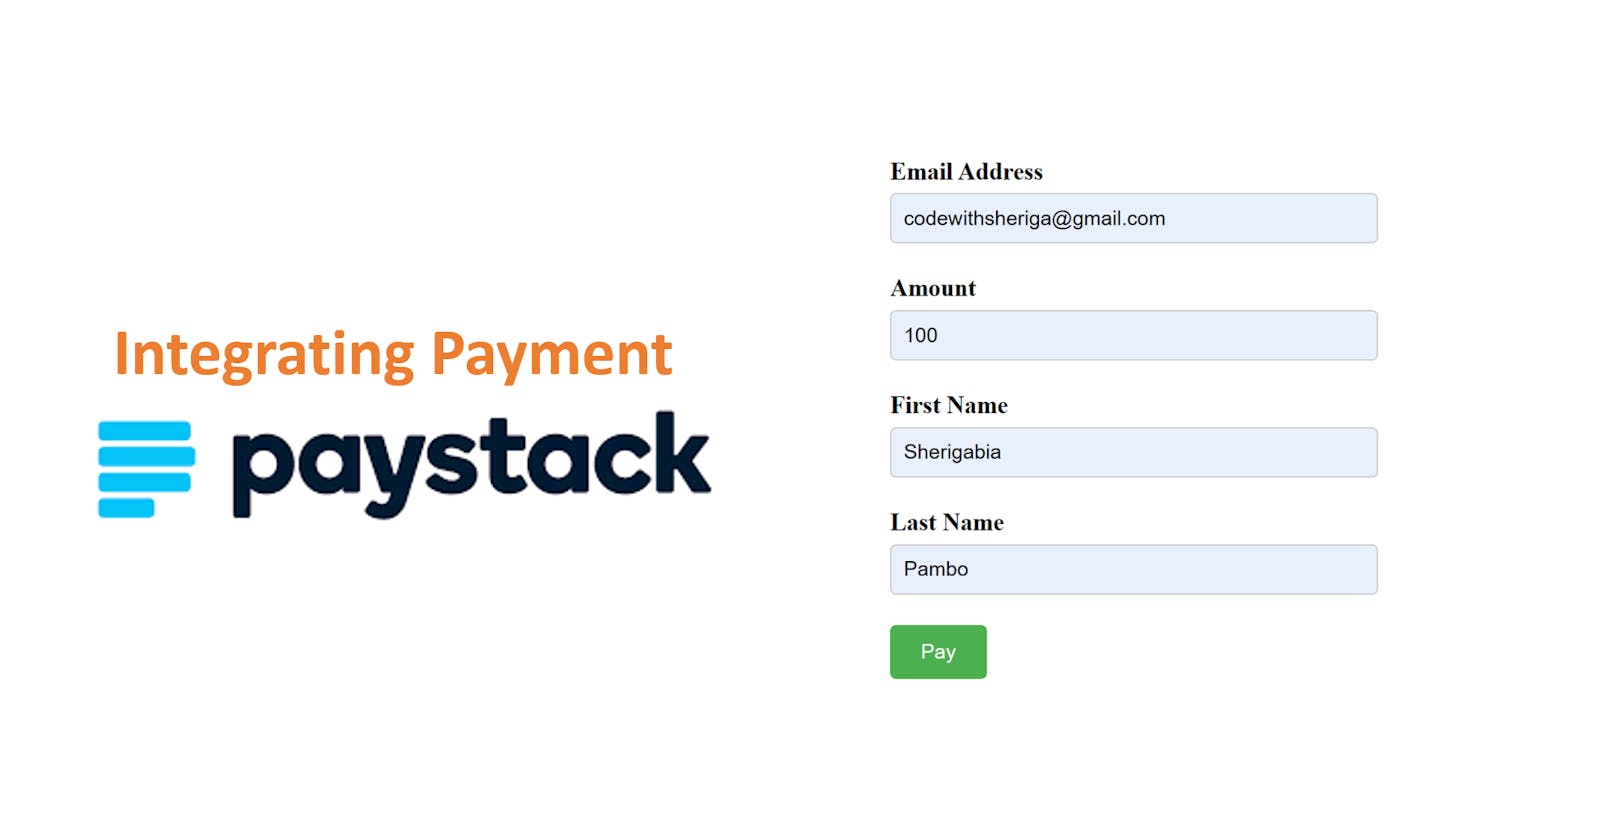 How to Integrate PayStack  into Your HTML & CSS Website: A Step-by-Step Guide